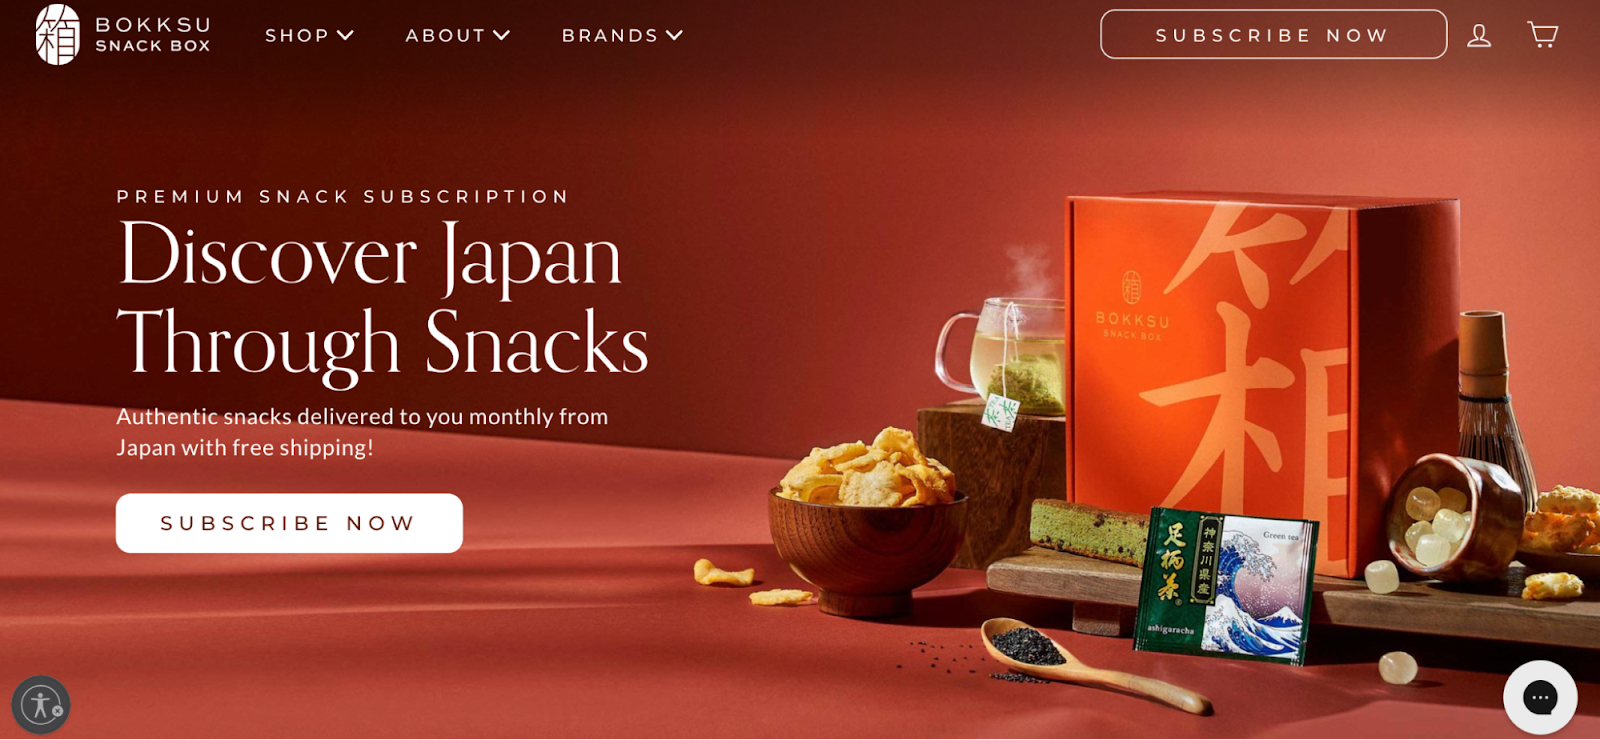 Bokksu Snack Box homepage, showing an example of subscriptions as an online business idea.